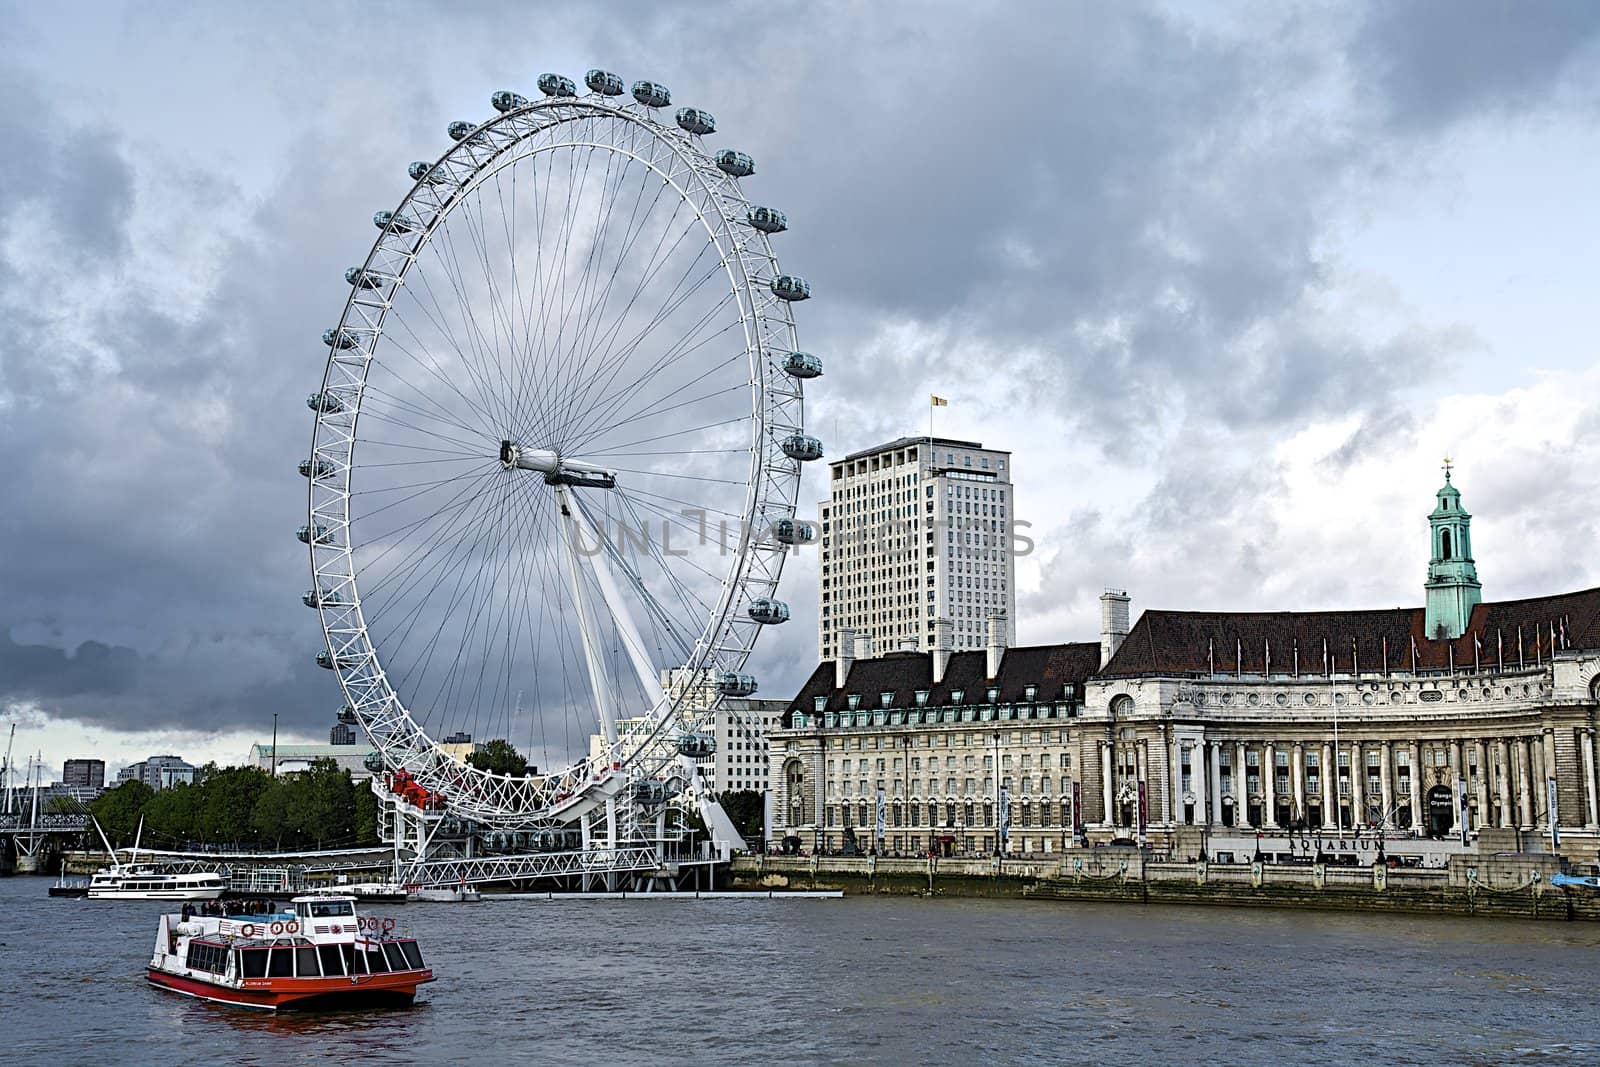 London Eye Over Looking the River Thames by instinia